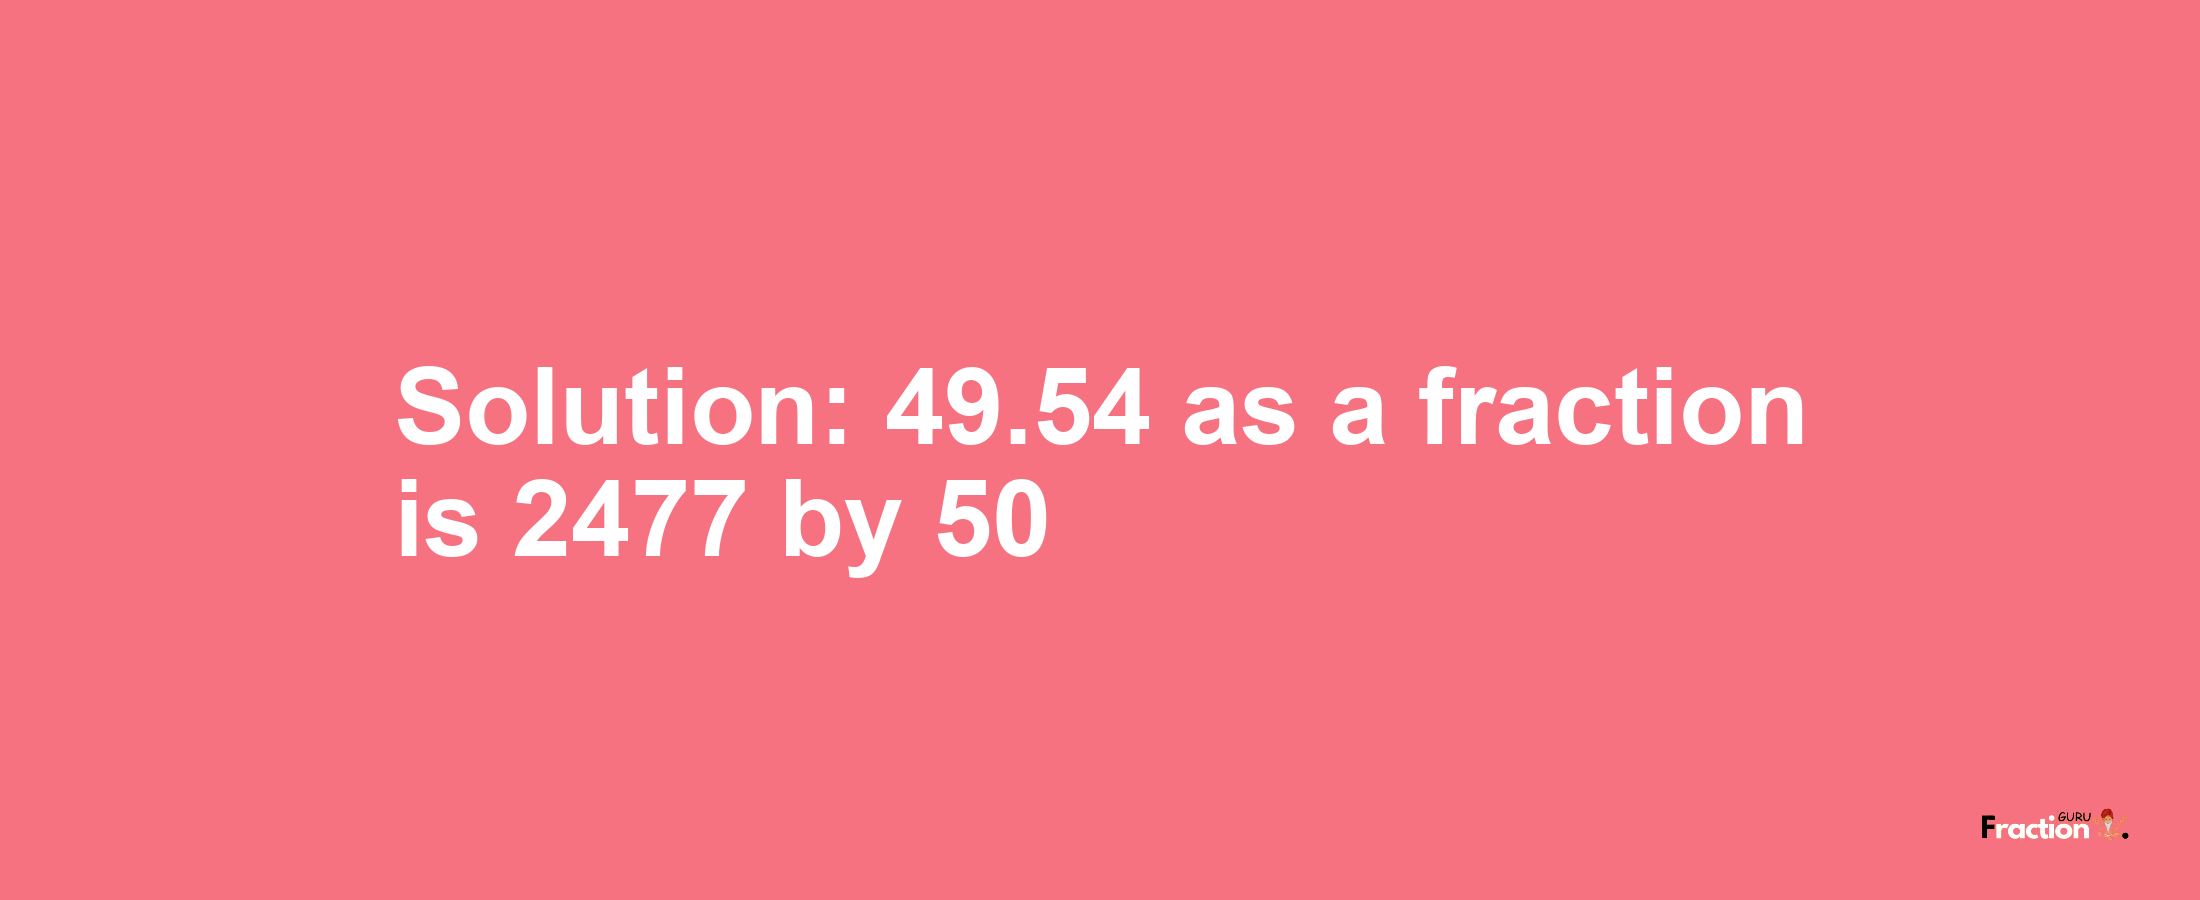 Solution:49.54 as a fraction is 2477/50